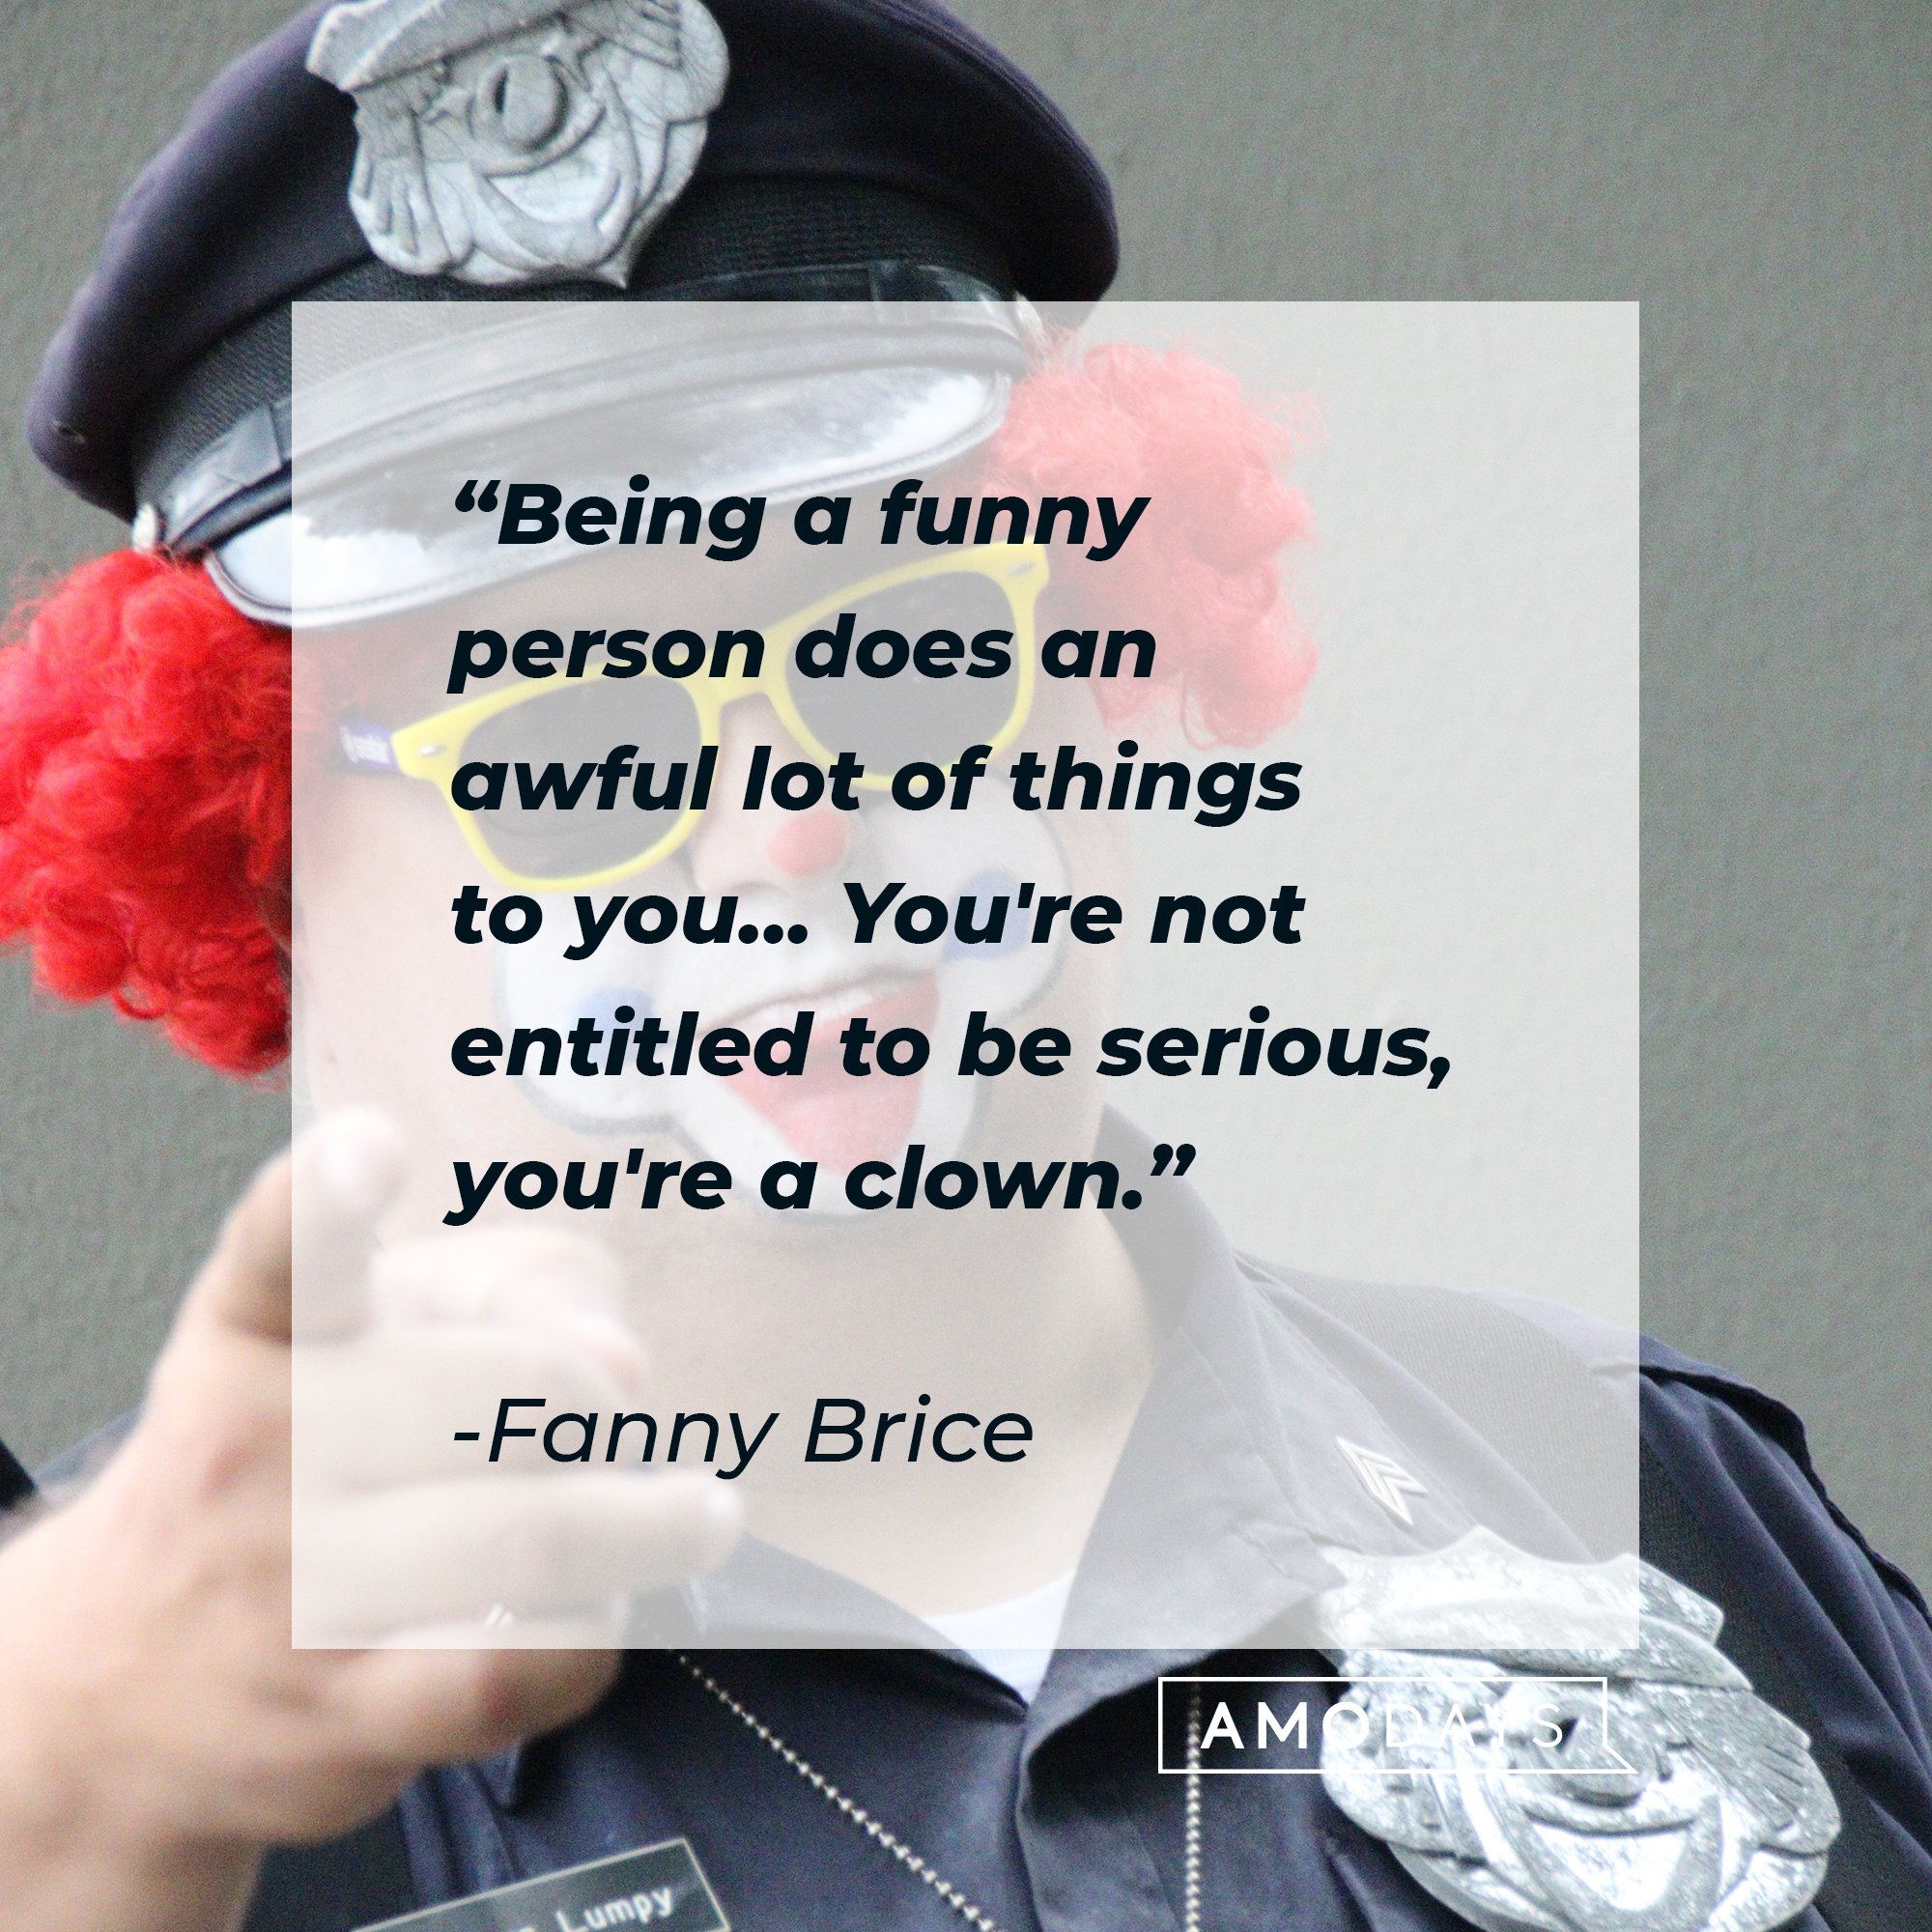  Fanny Brice's quote "Being a funny person does an awful lot of things to you... You're not entitled to be serious, you're a clown." | Source: Unsplash.com